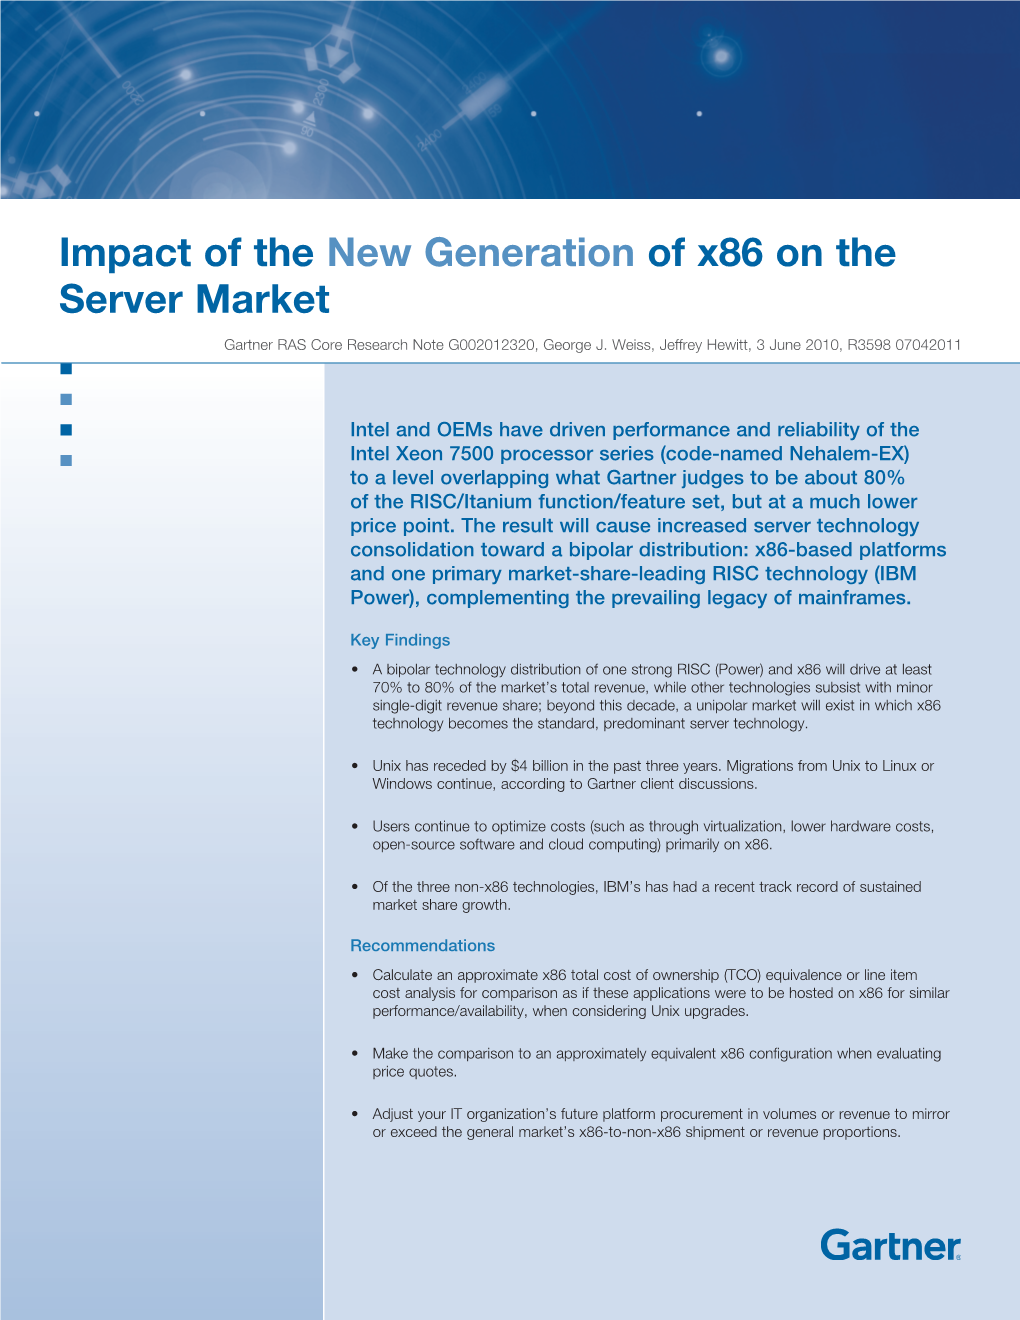 Impact of the New Generation of X86 on the Server Market